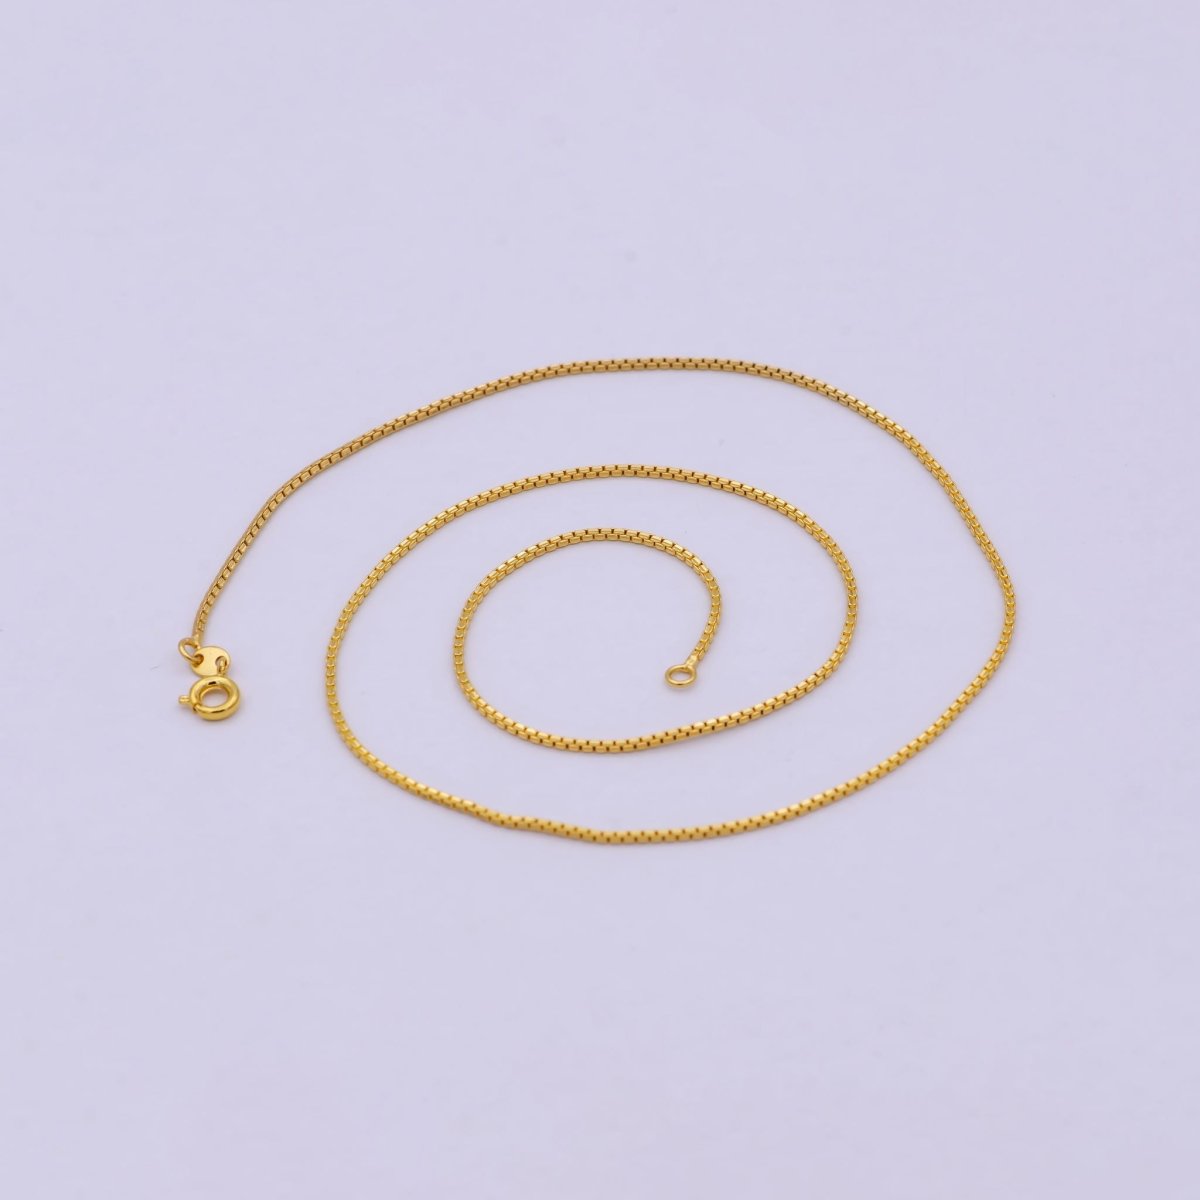 17.7 Inch Boston Box Finished Chain, Dainty 1.1mm 24K Gold Plated Box Necklace with Spring Ring | WA-624 Clearance Pricing - DLUXCA